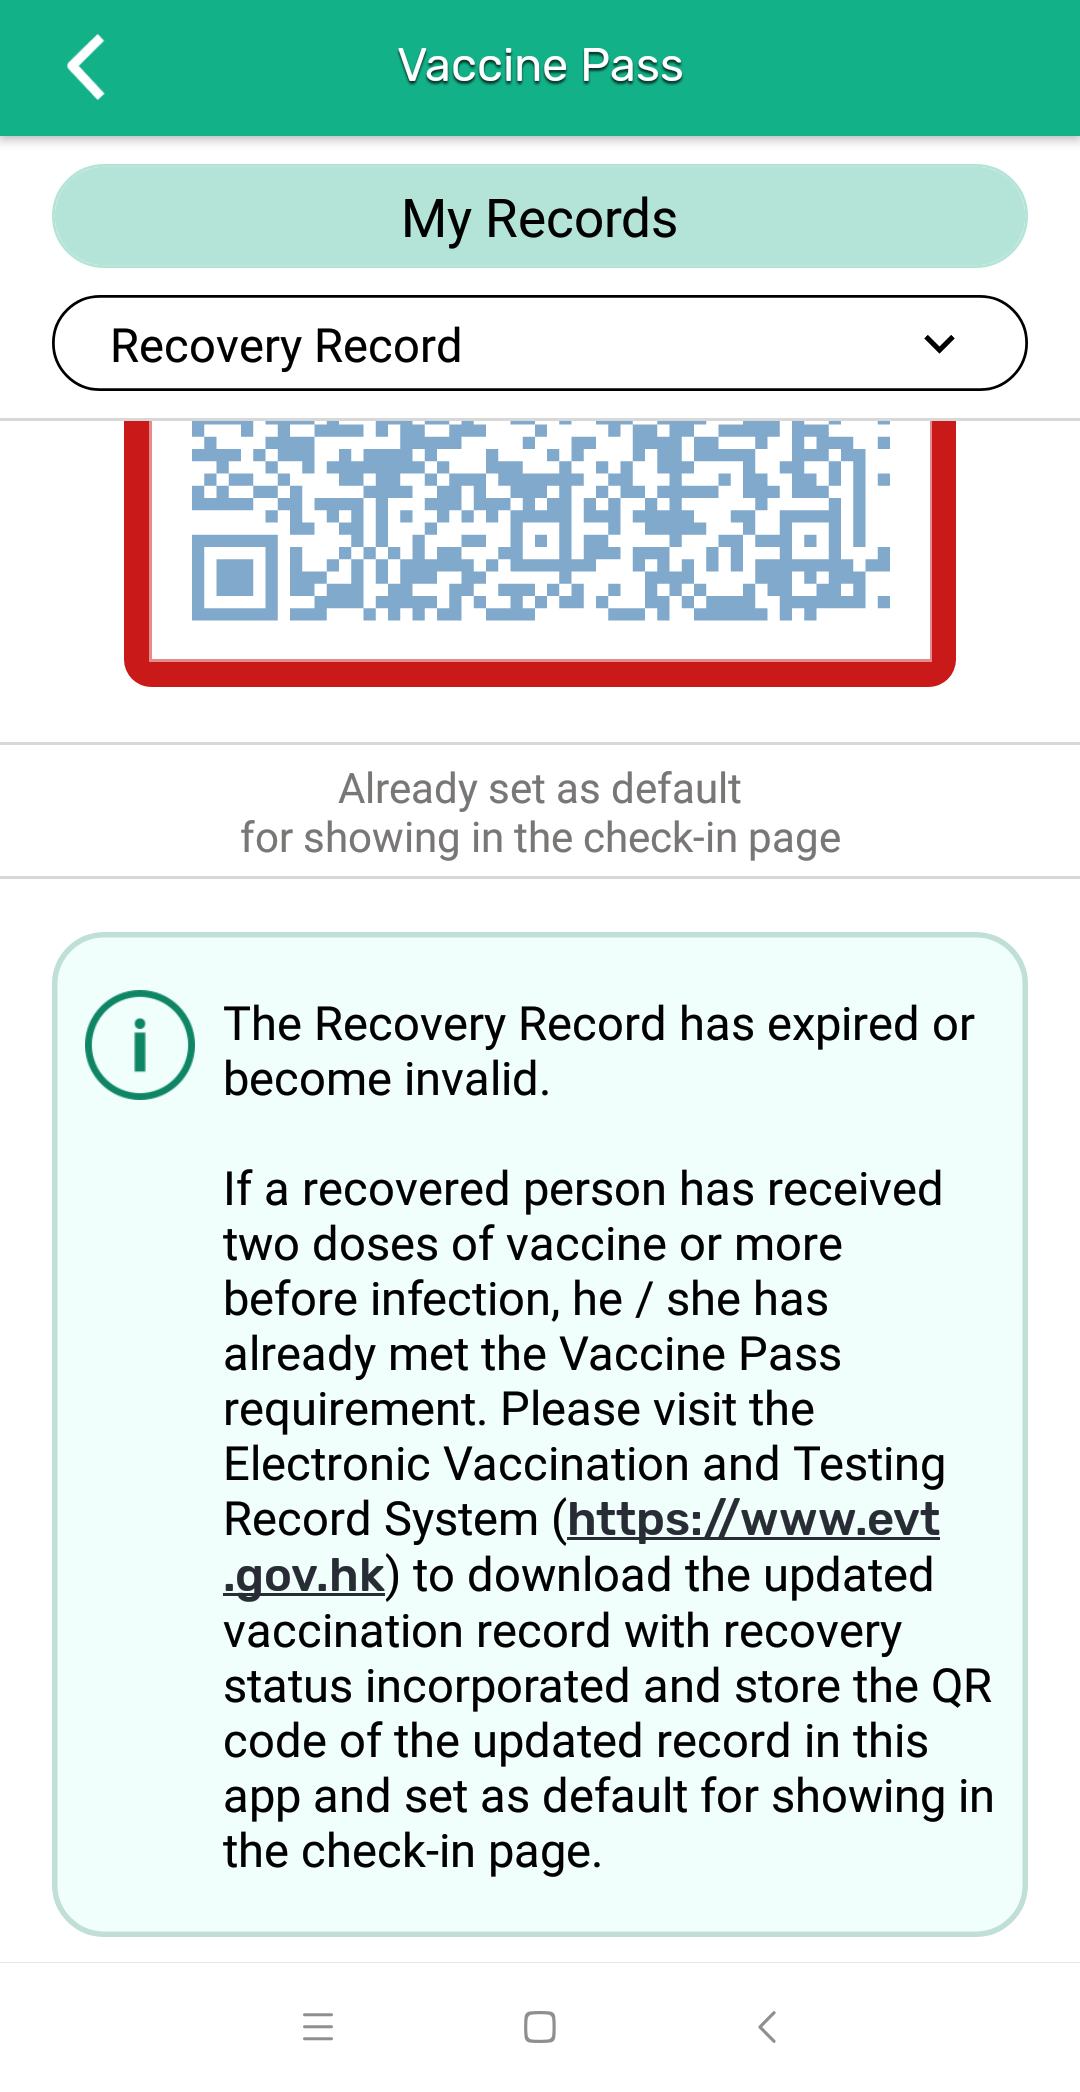 A new automatic reminder function has been added to the "LeaveHomeSafe" mobile app today (October 31), if users have tested positive for COVID-19 and set the recovery record QR code as their Vaccine Pass, the app will remind them to update their vaccination records after the recovery record has expired or becomes invalid.